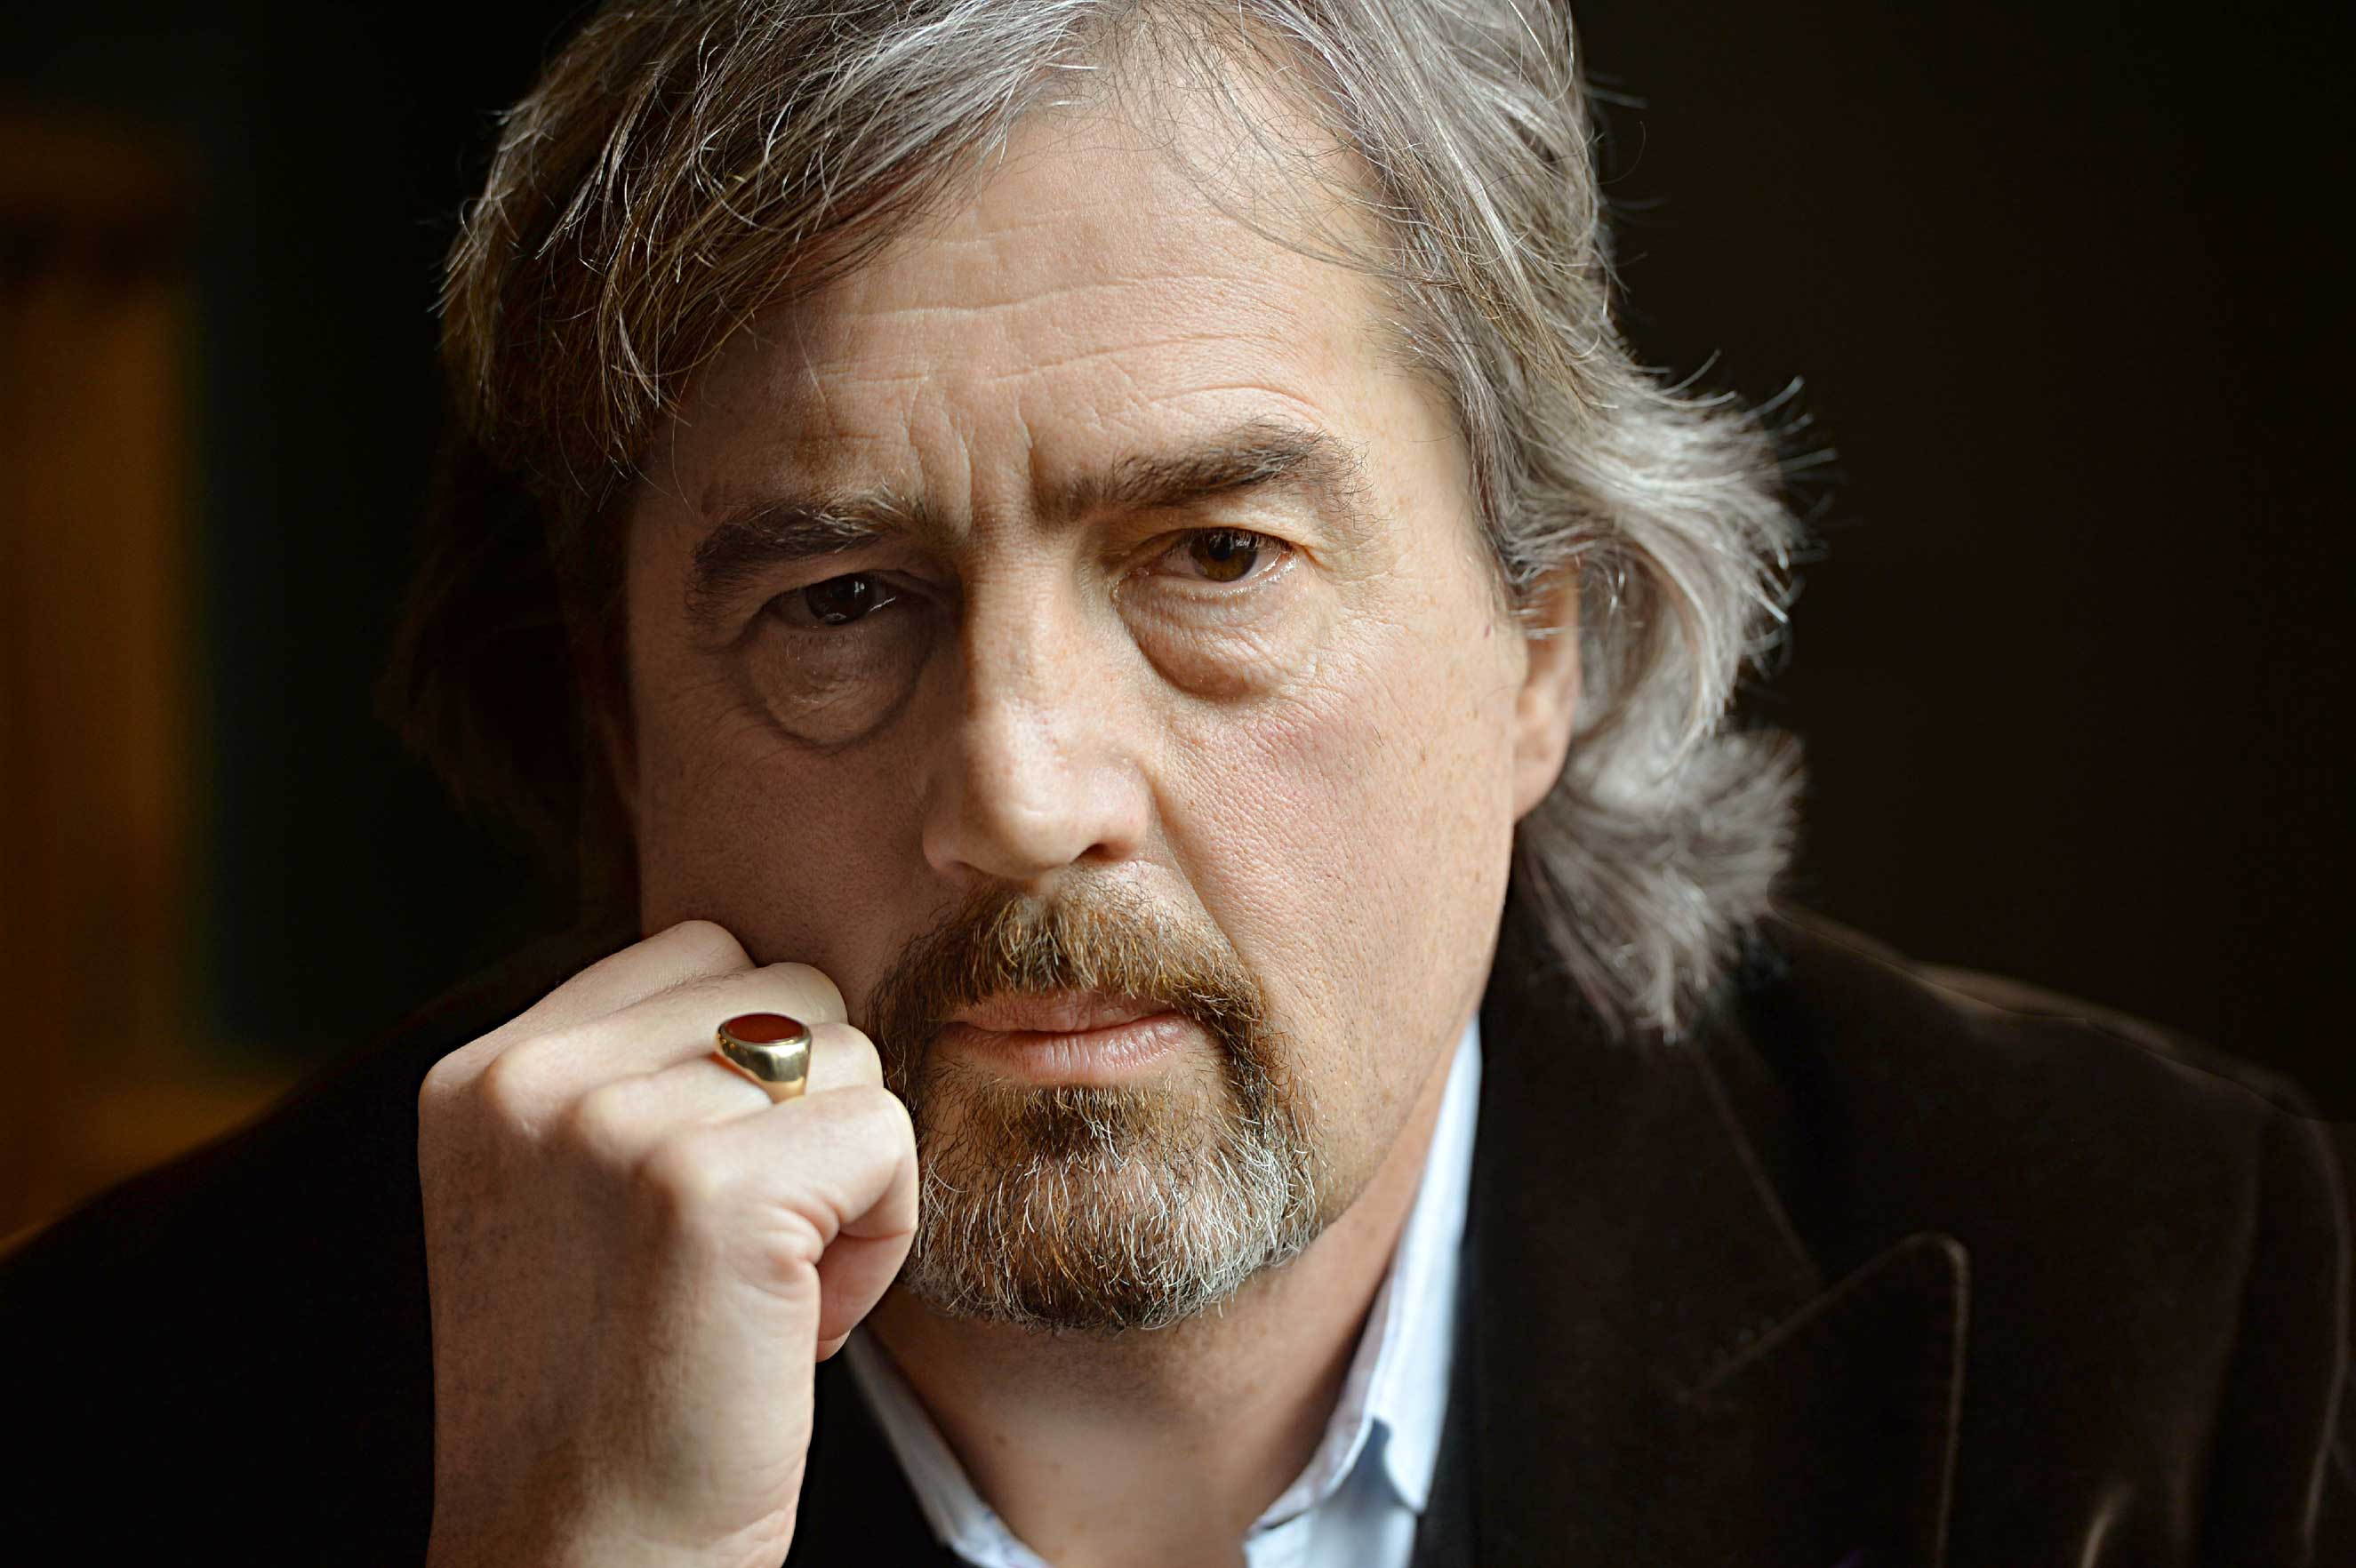 Sebastian Barry was short-listed for the Man Booker Prize for A Long Long Way and The Secret Scripture (The Irish Times/Penguin Random House)